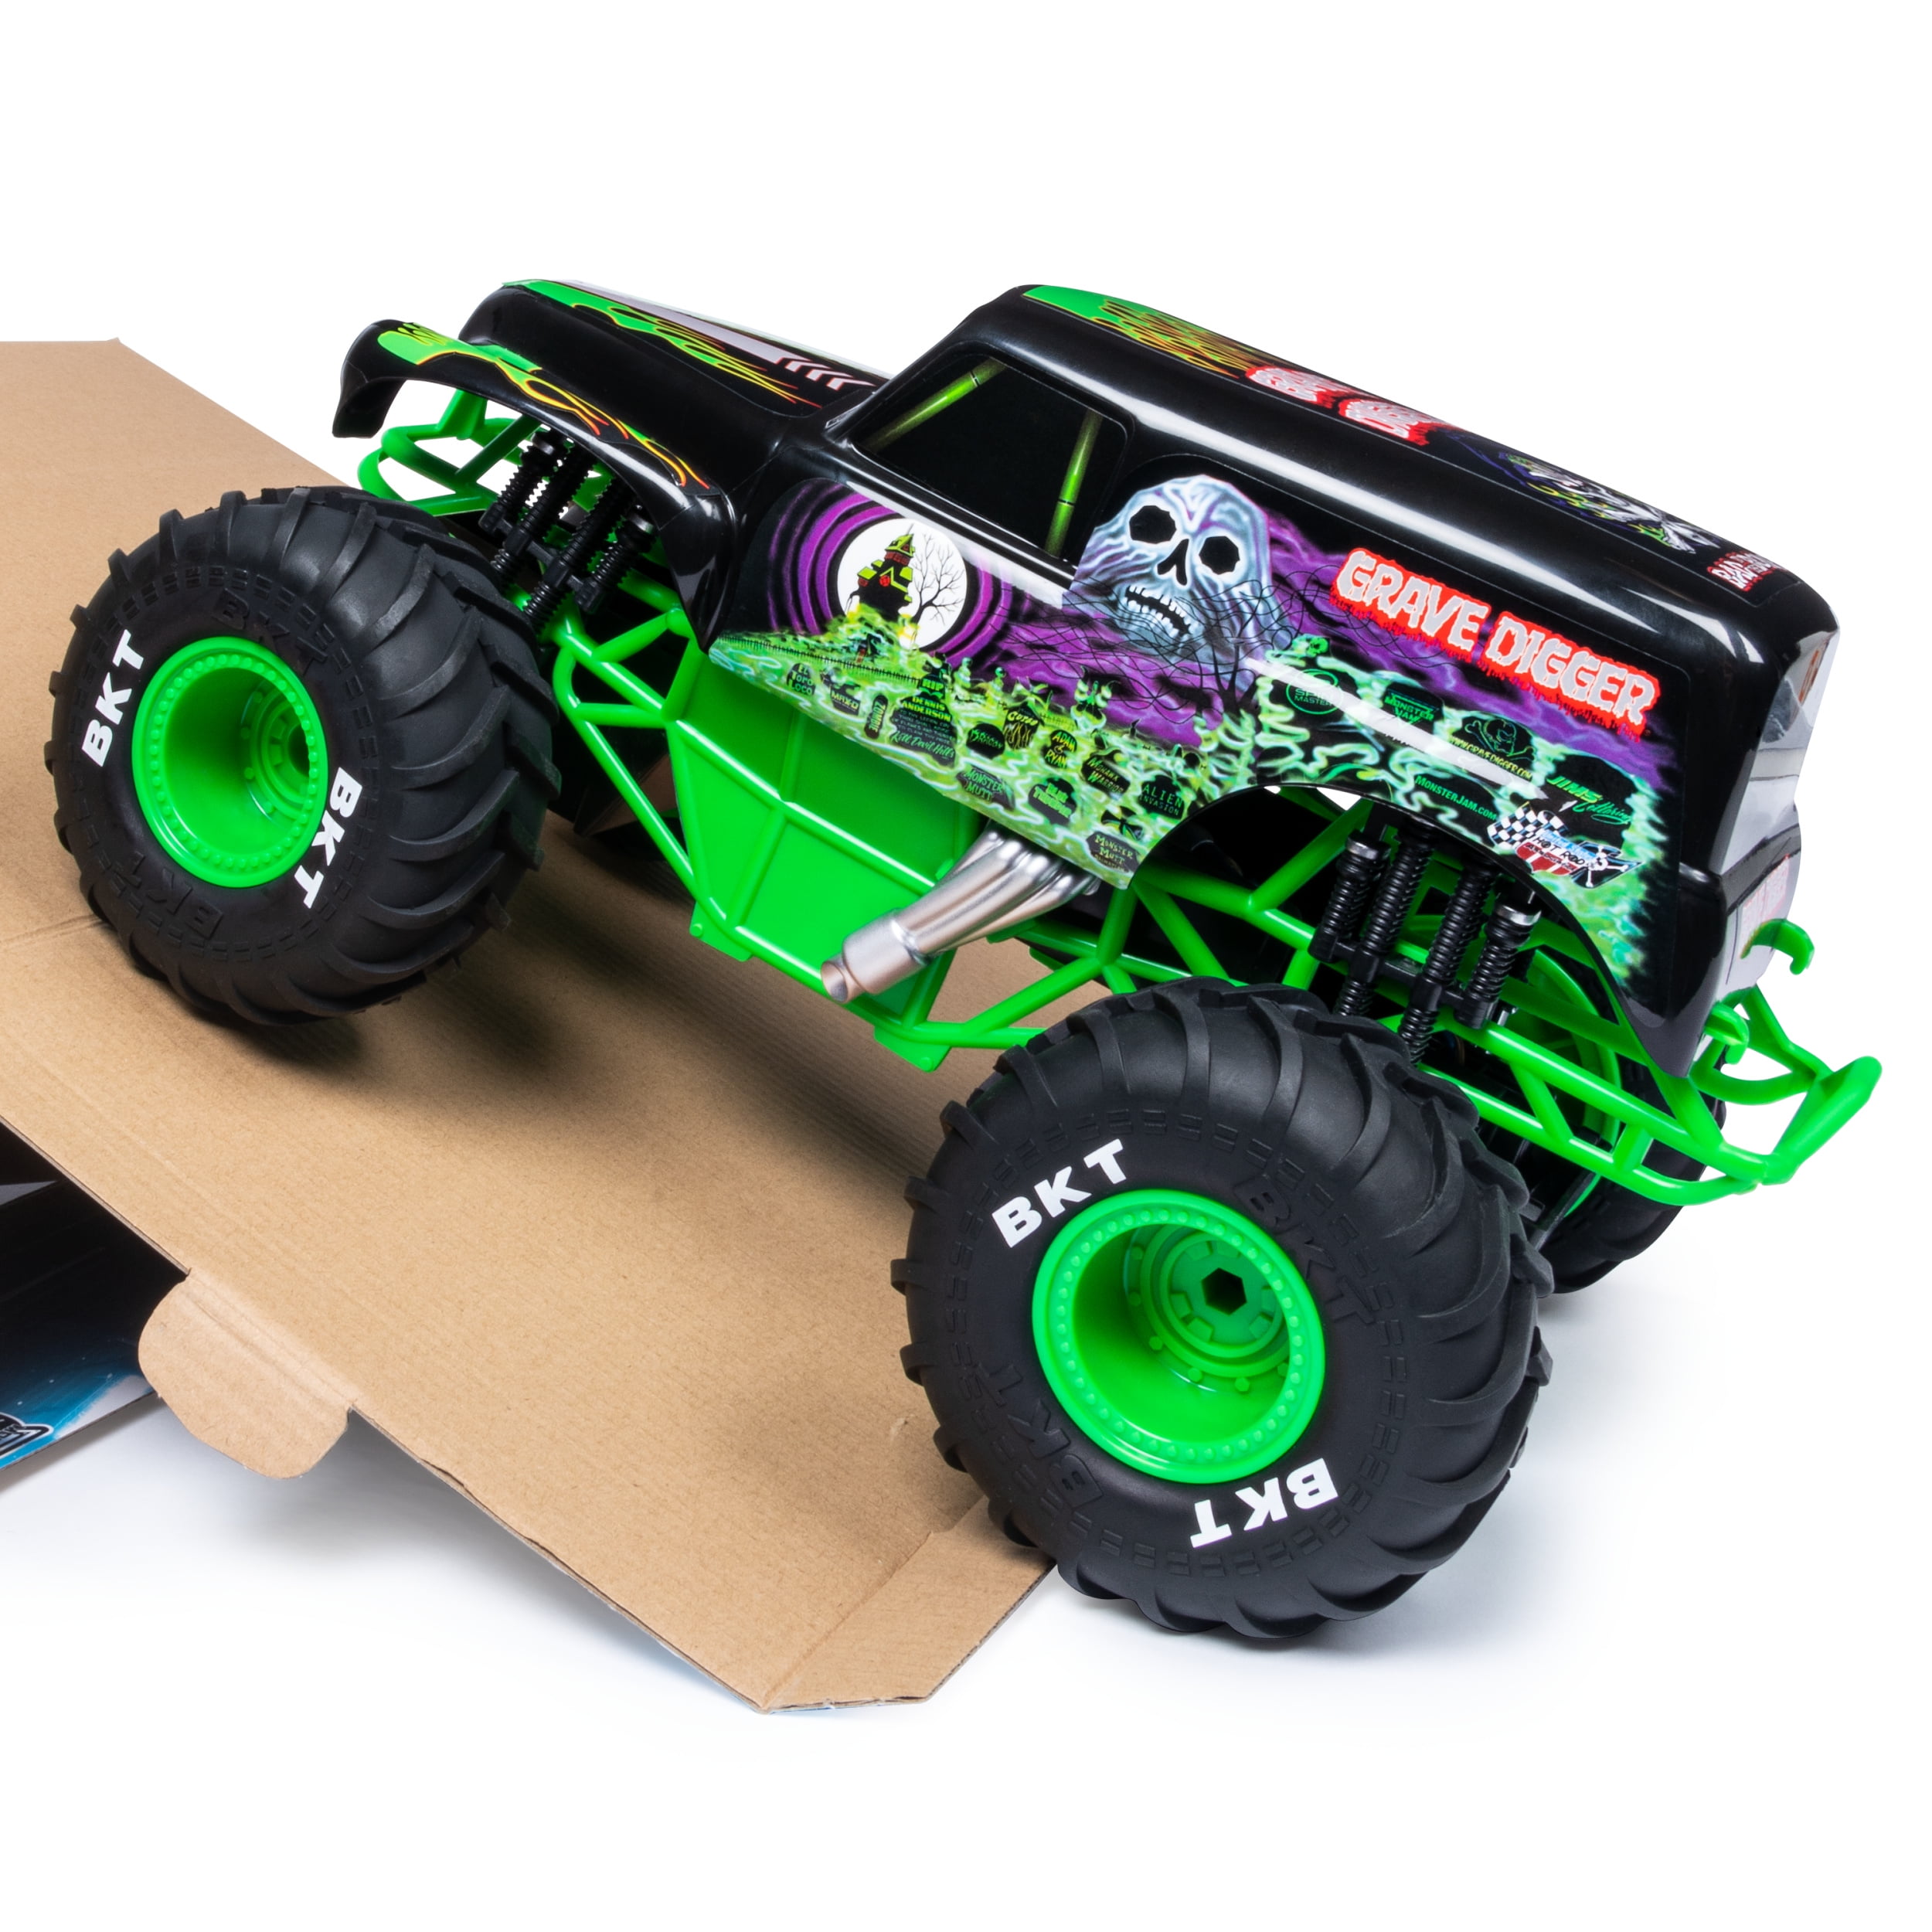 spin master rc grave digger